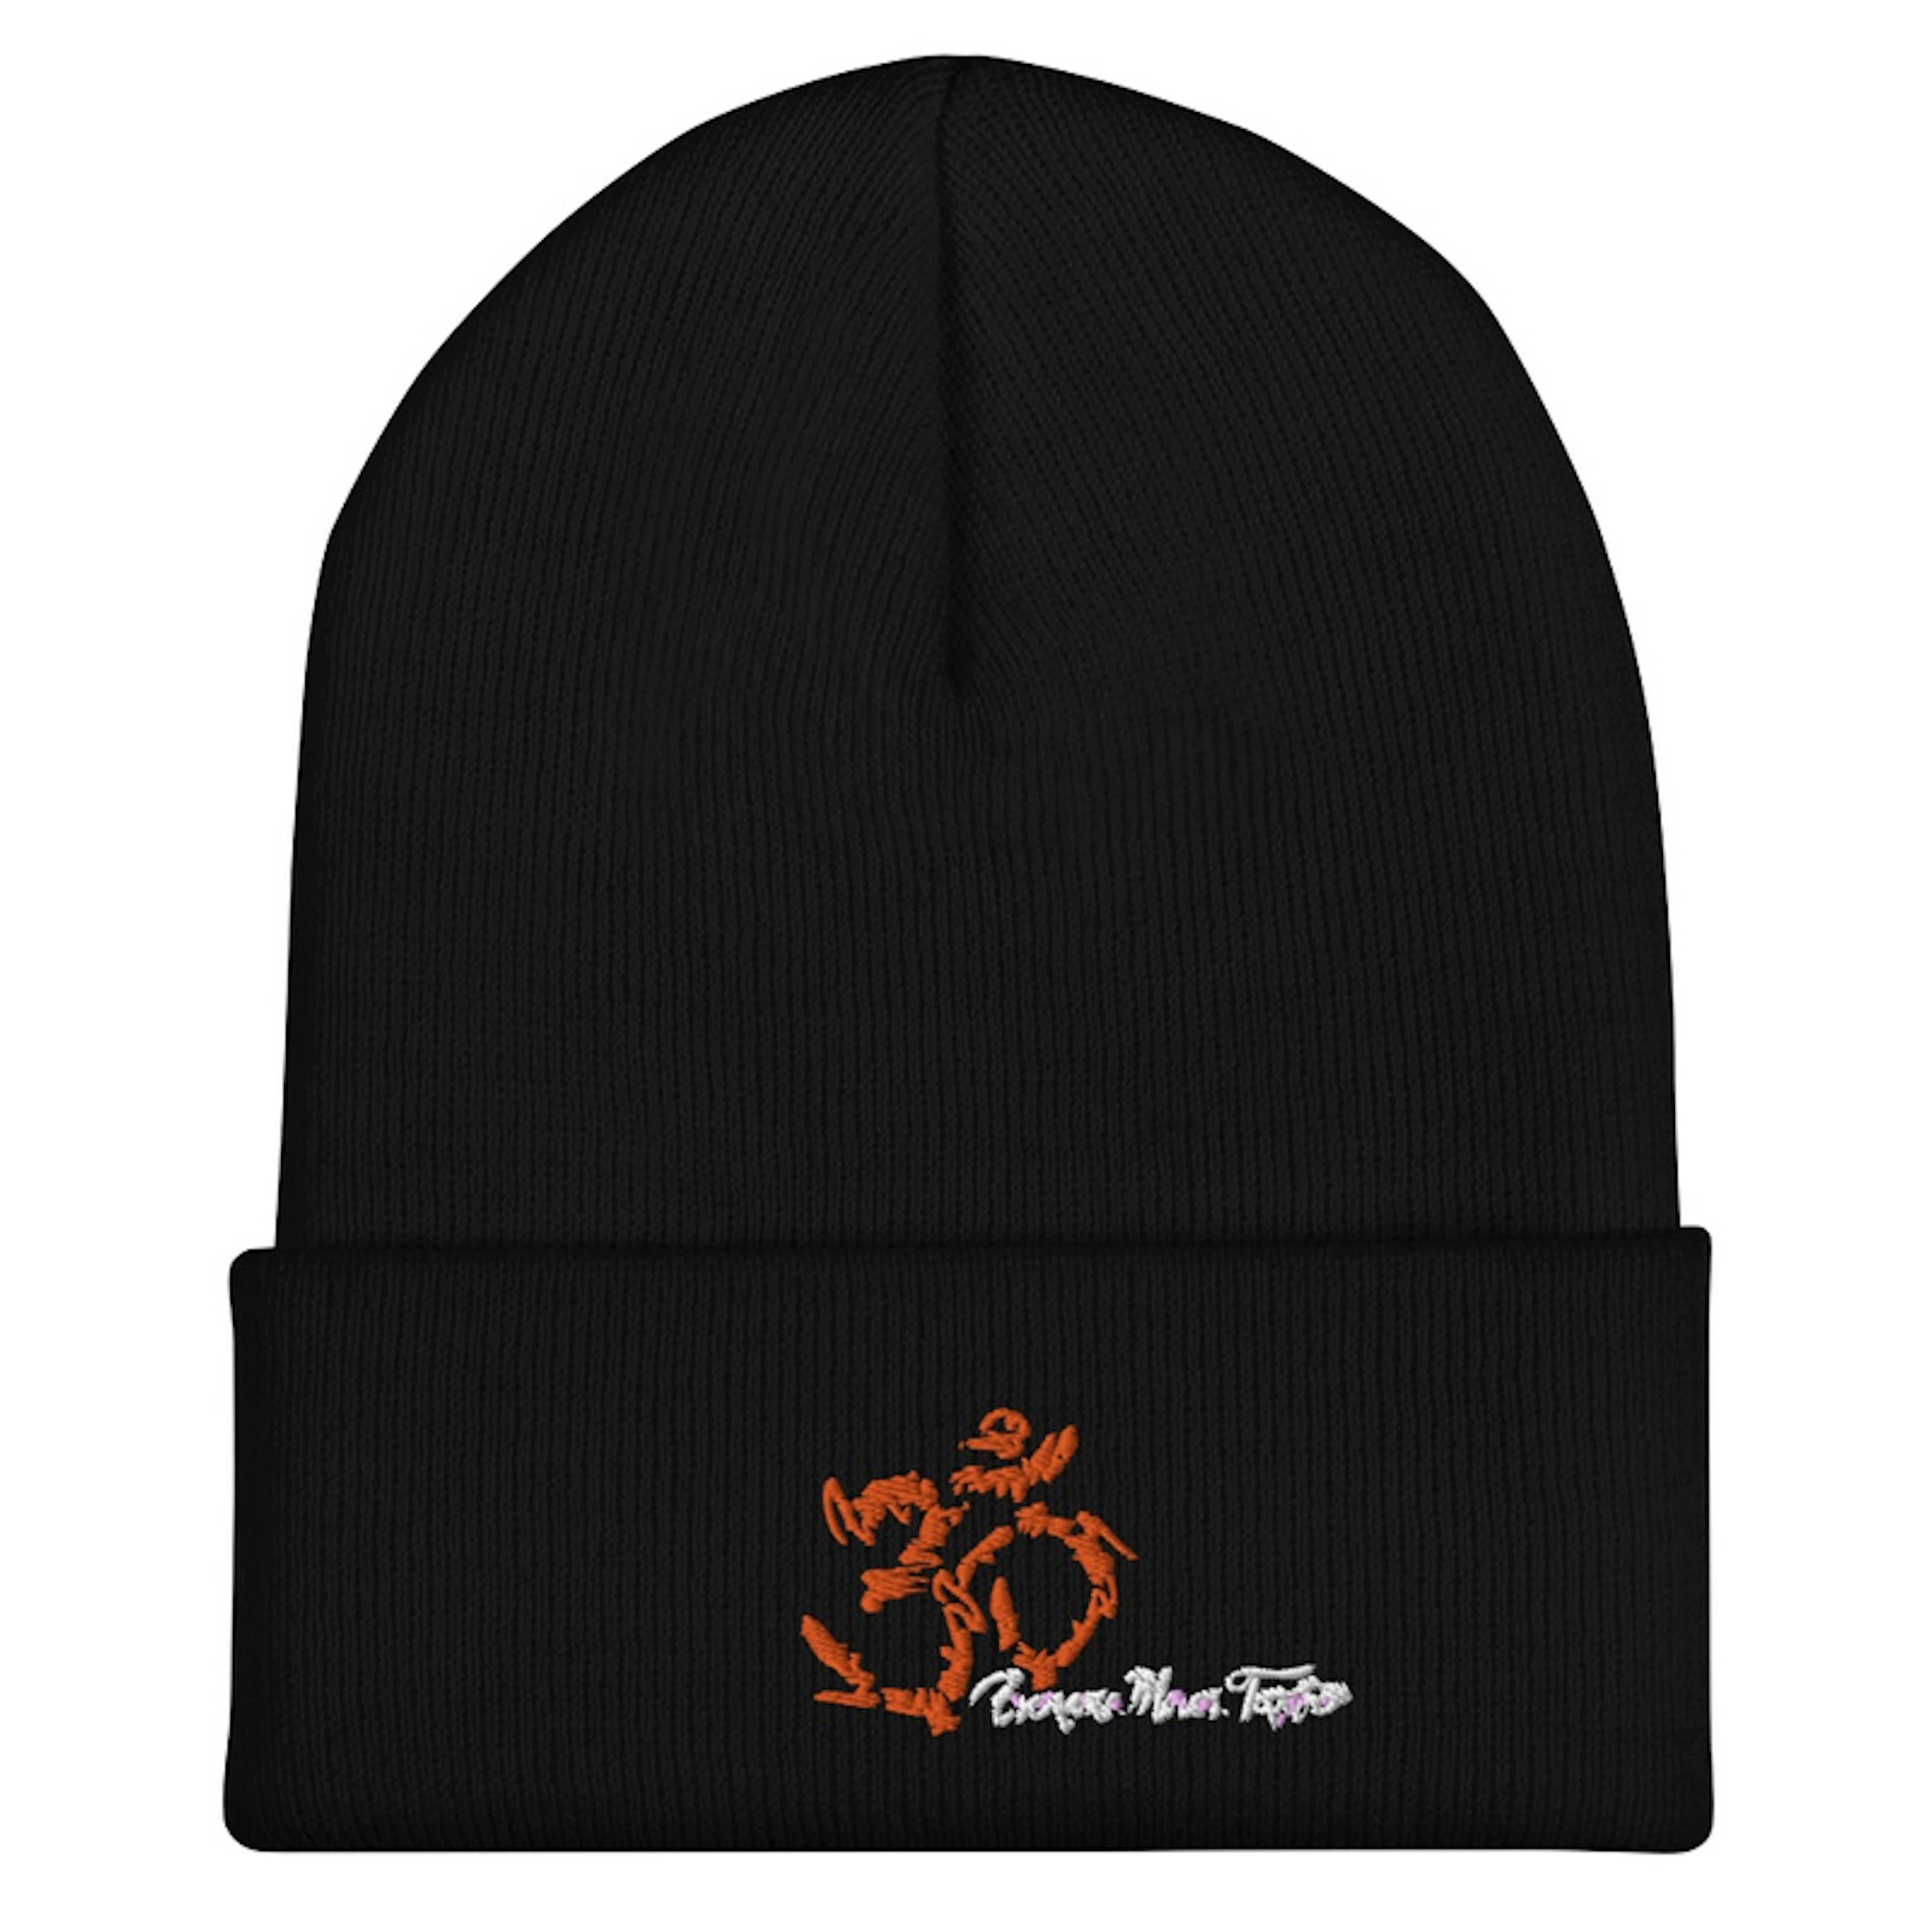 EveryoneOHMzTogether - The Beanie